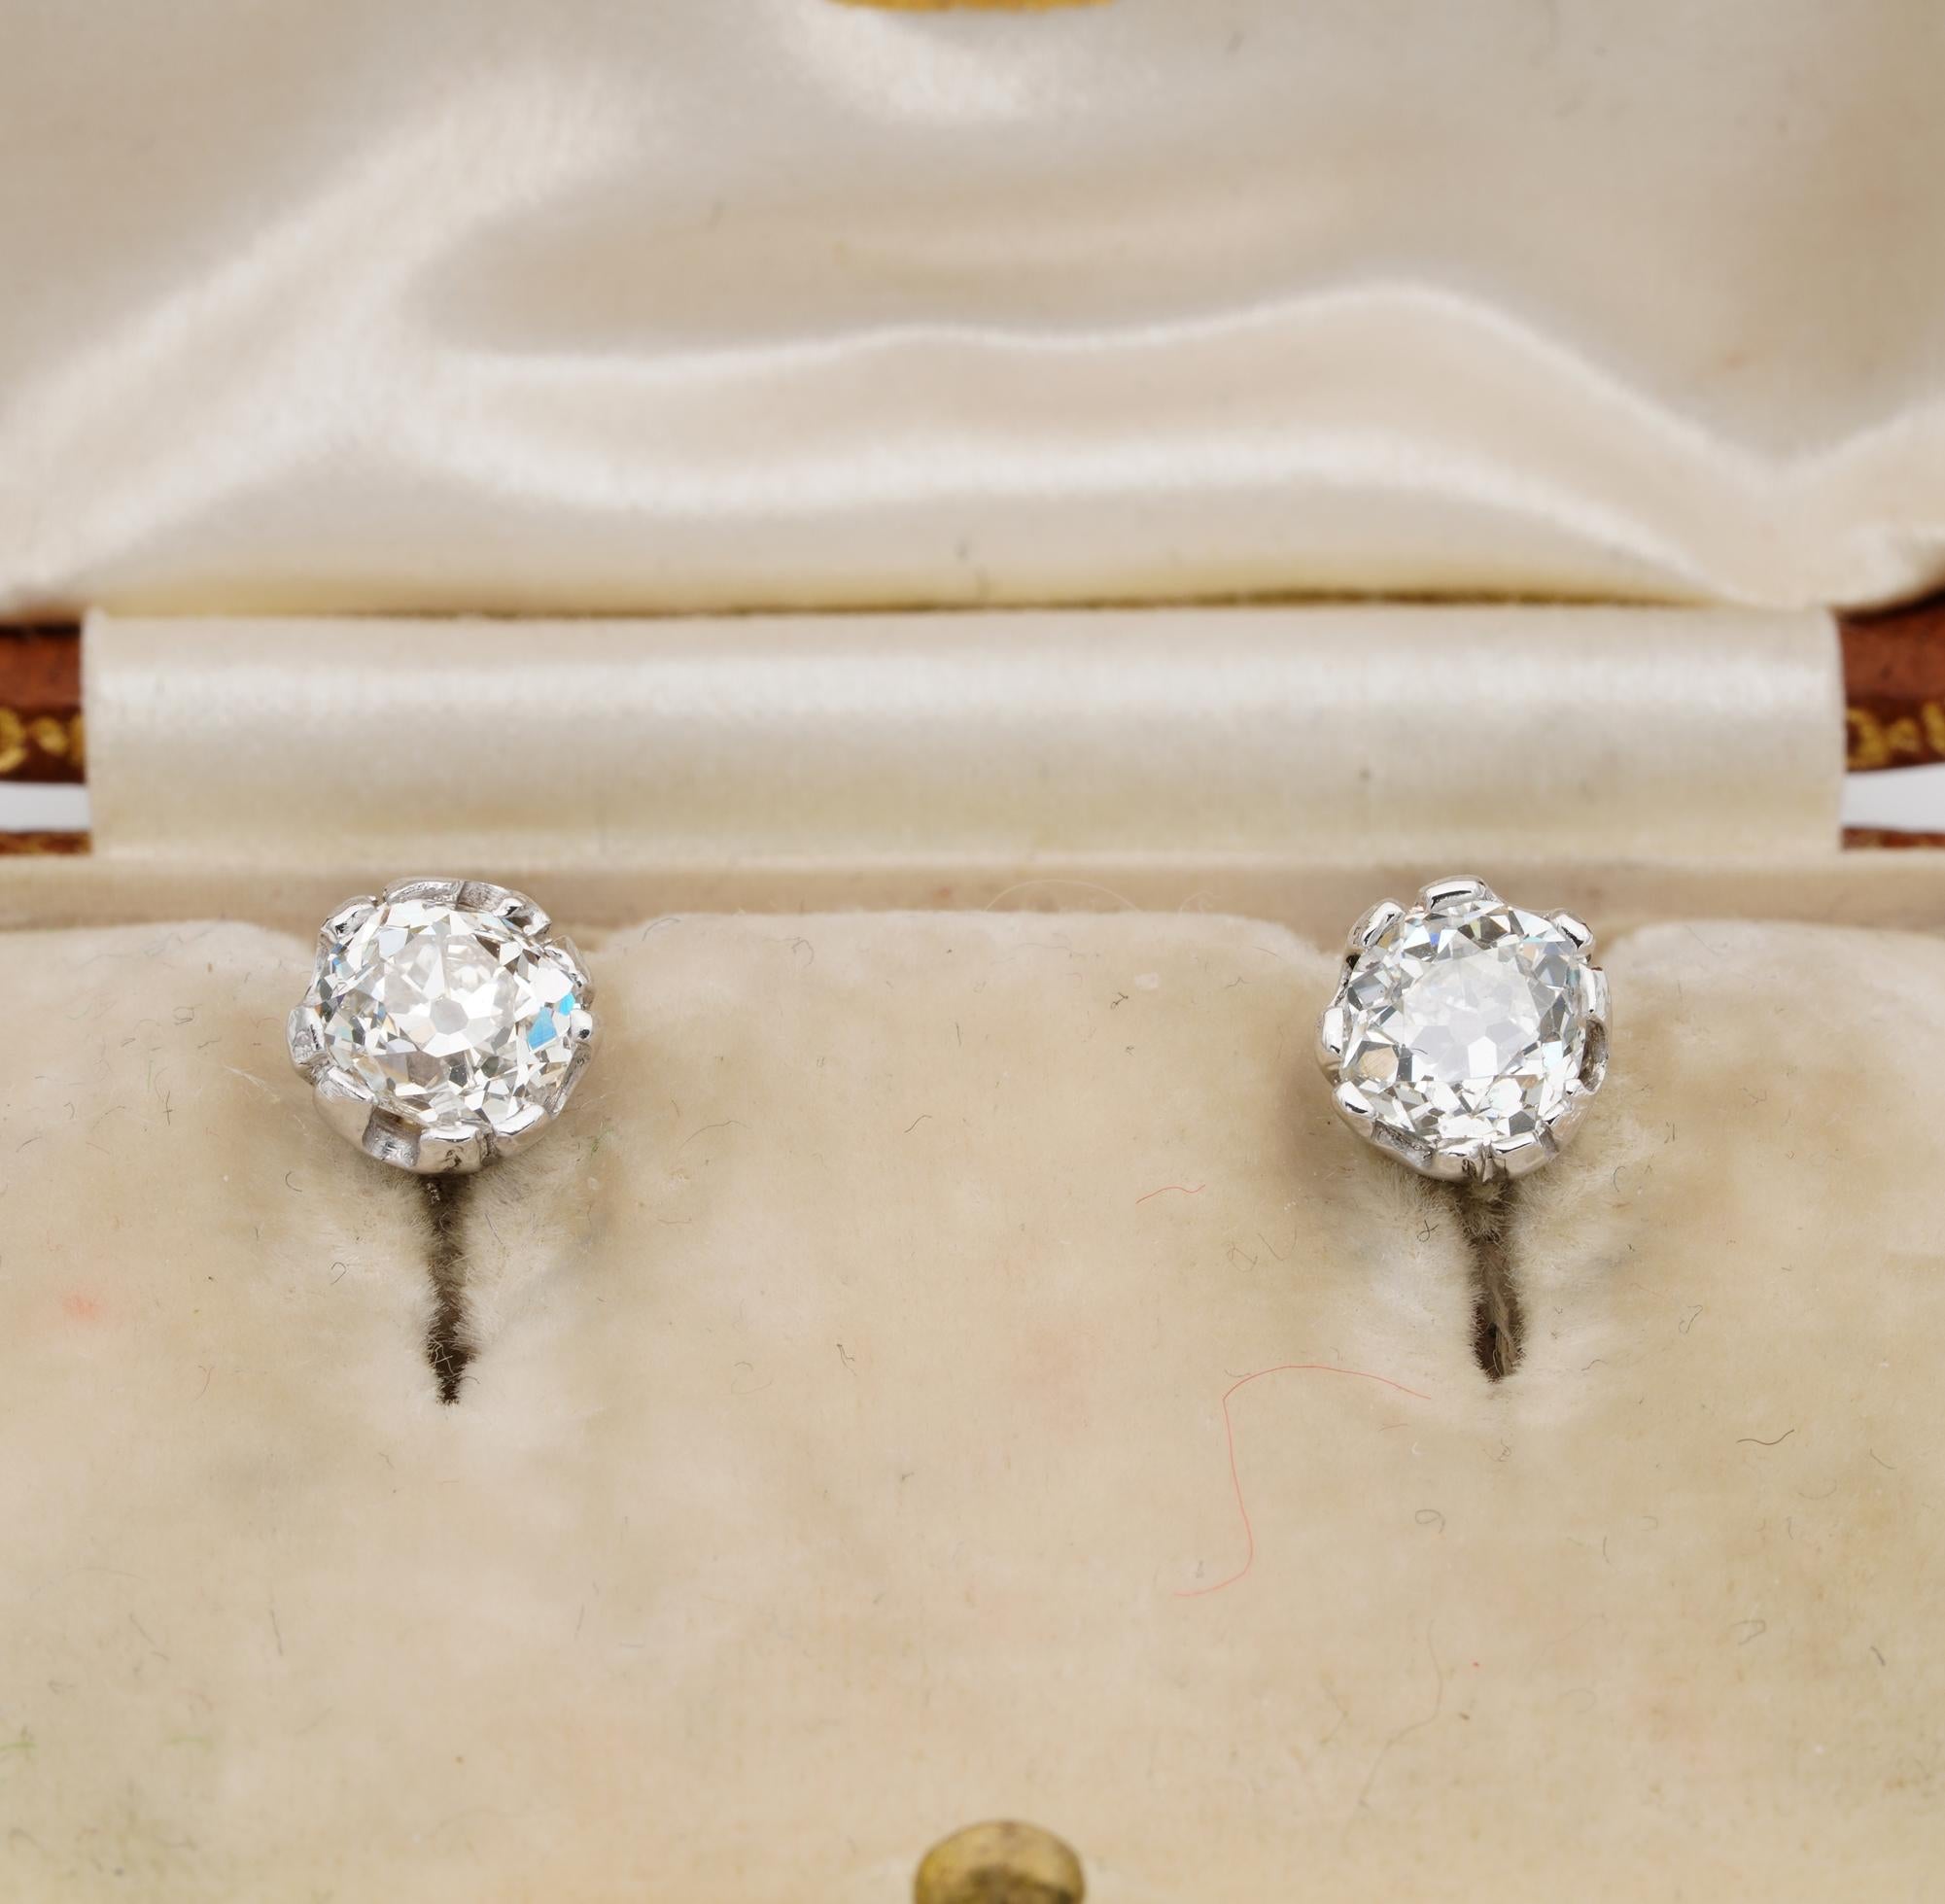 Stellar Diamond Studs!

Most desirable, always perfect, rare collectable antique and cut Diamonds are the stars of these perfect easy wear stud earrings
1930 ca, original late Deco, all Platinum made except the back pins and butterfly fasteners